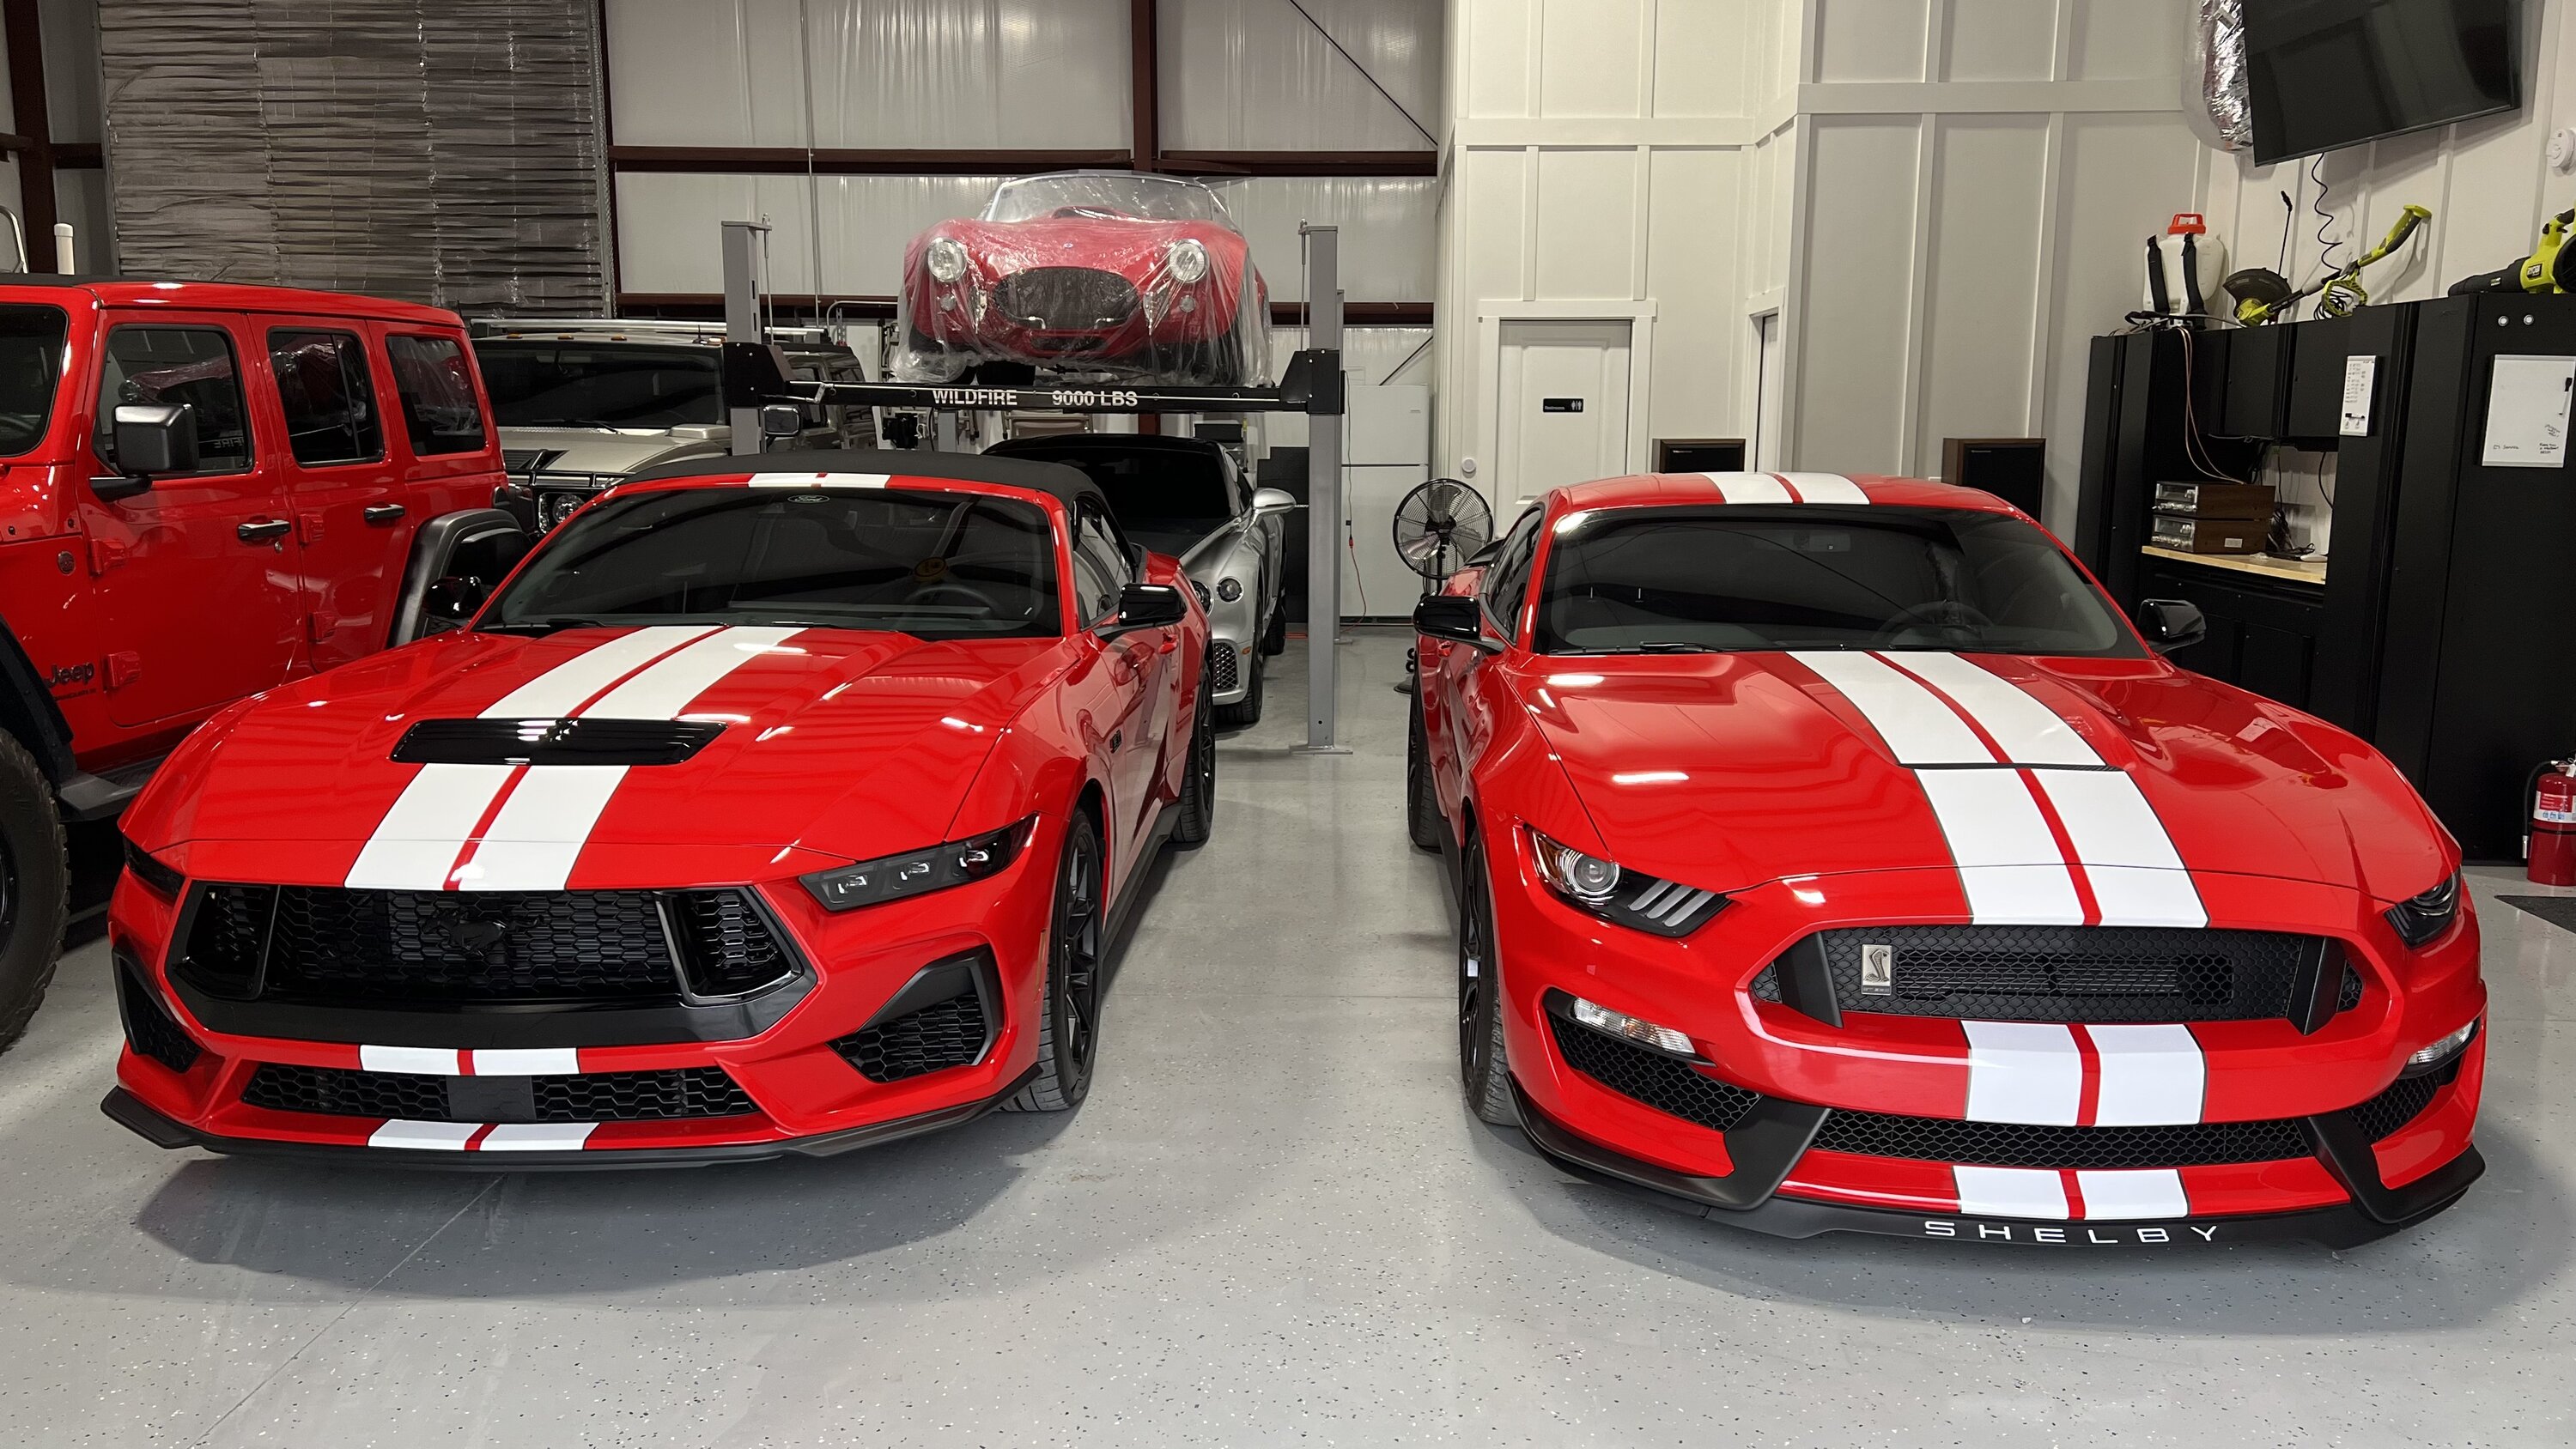 S650 Mustang S650 Red convertible with stripes next to GT350 IMG_9427